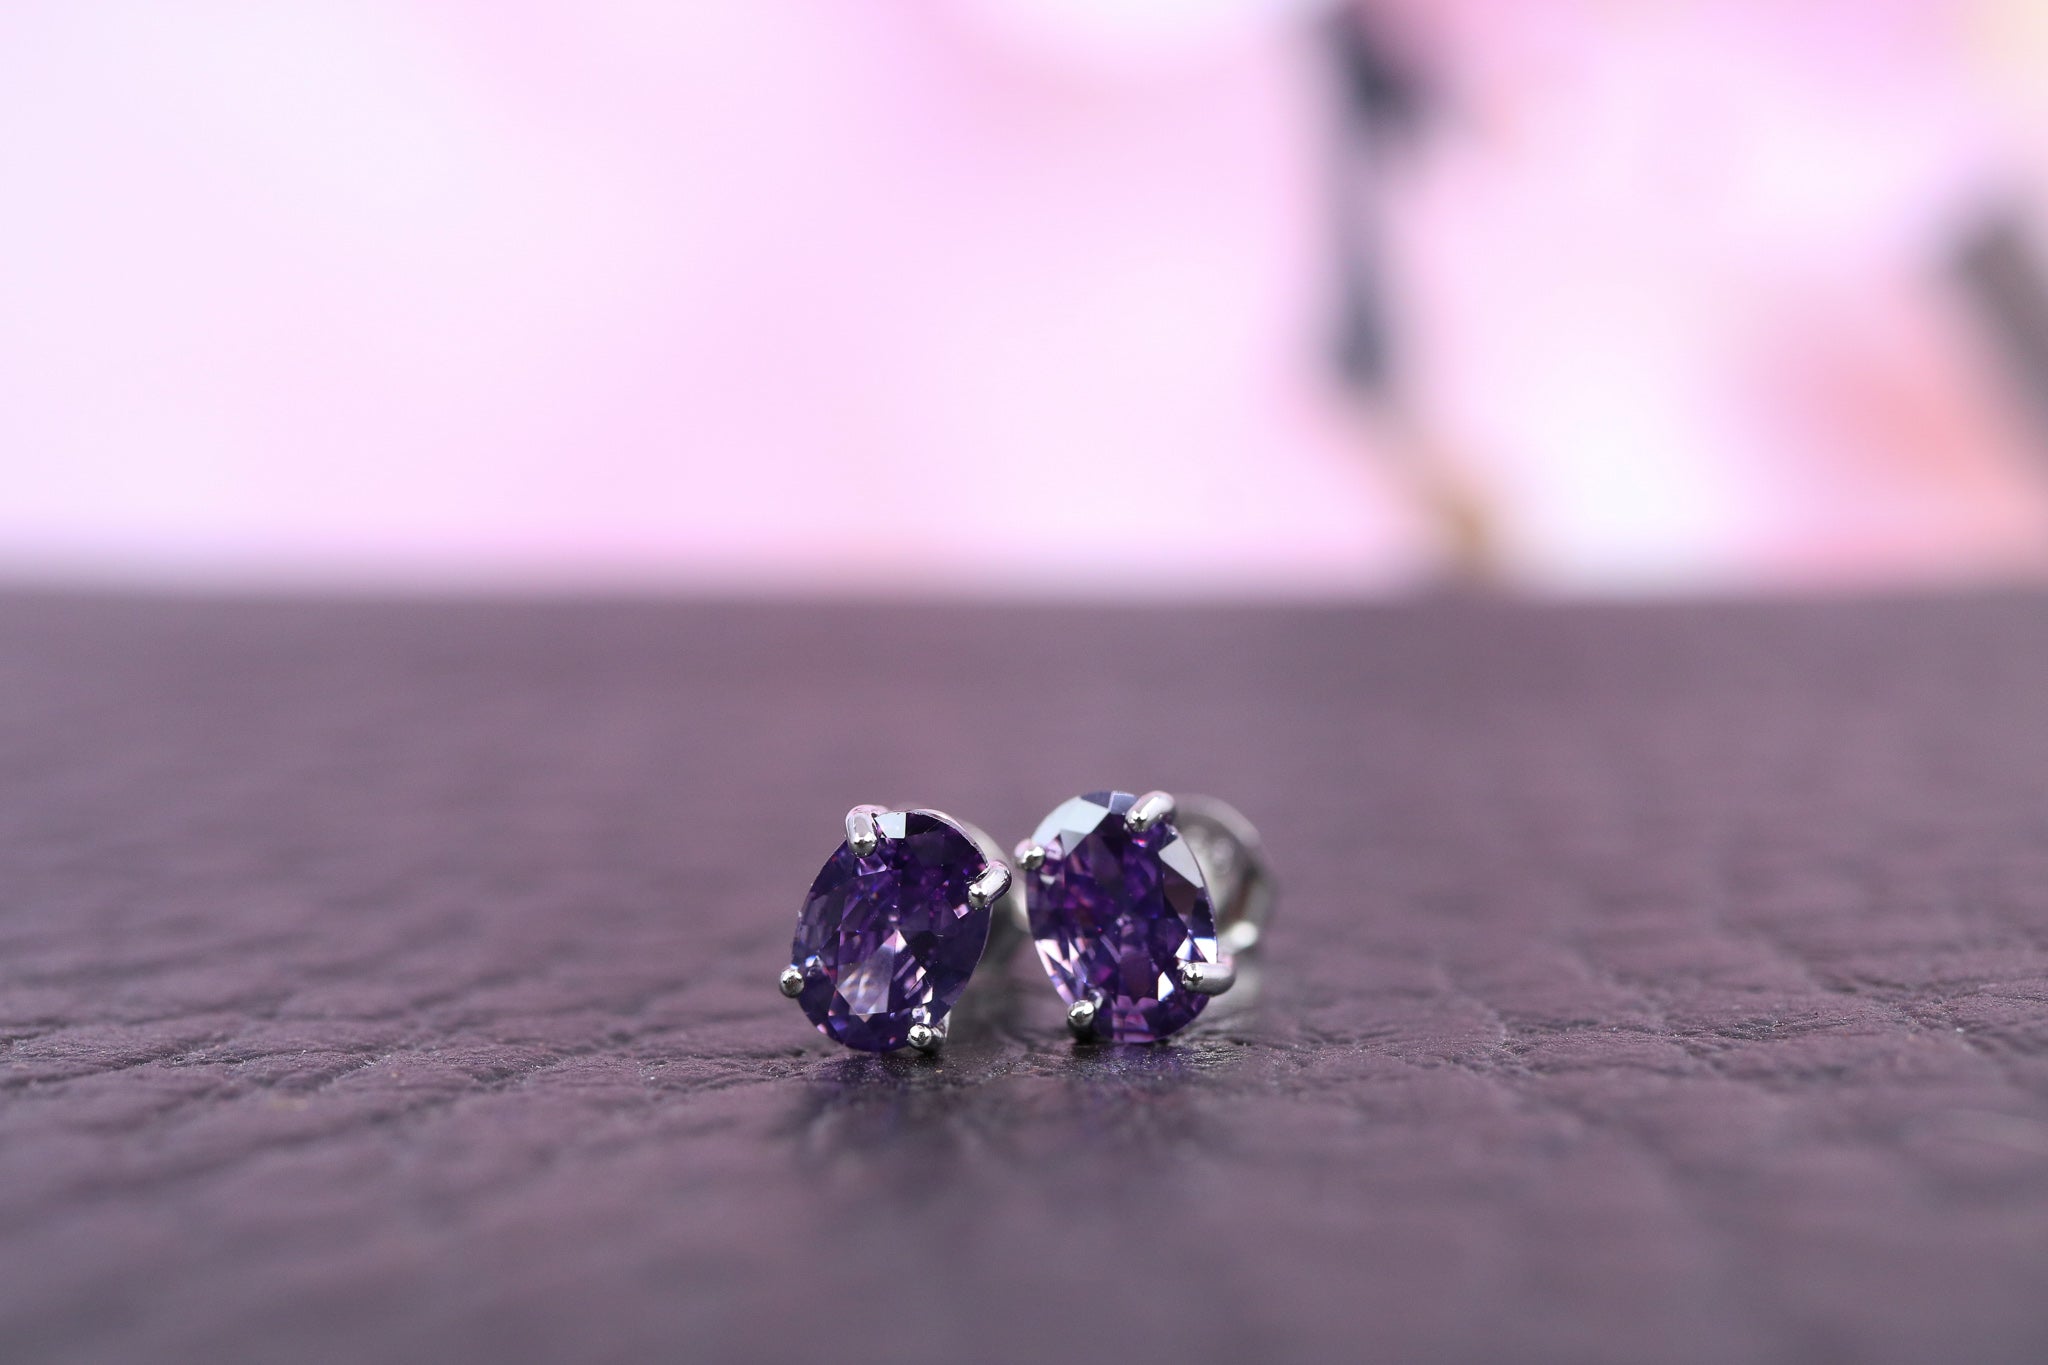 Sterling Silver & CZ Earrings - IN1109 - Hallmark Jewellers Formby & The Jewellers Bench Widnes